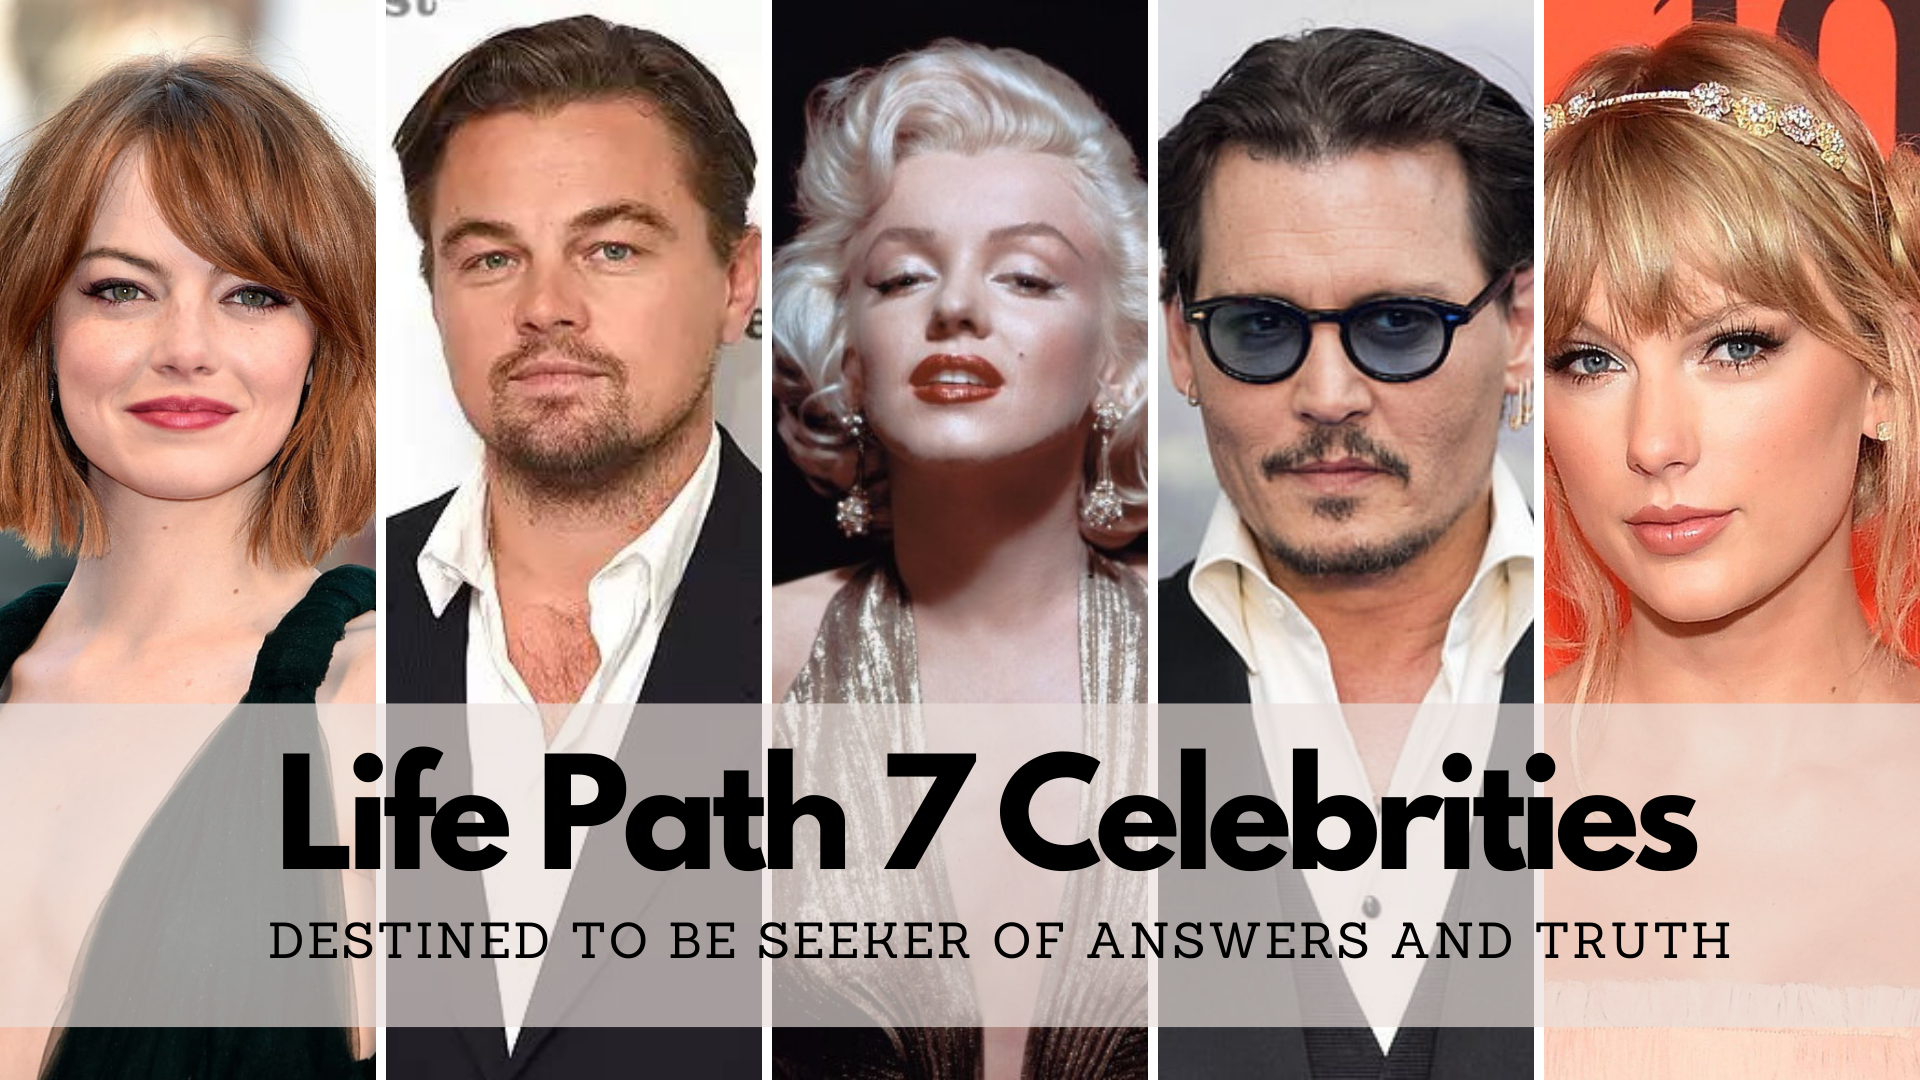 Life Path 7 Celebrities - Destined To Be Seeker Of Answers And Truth